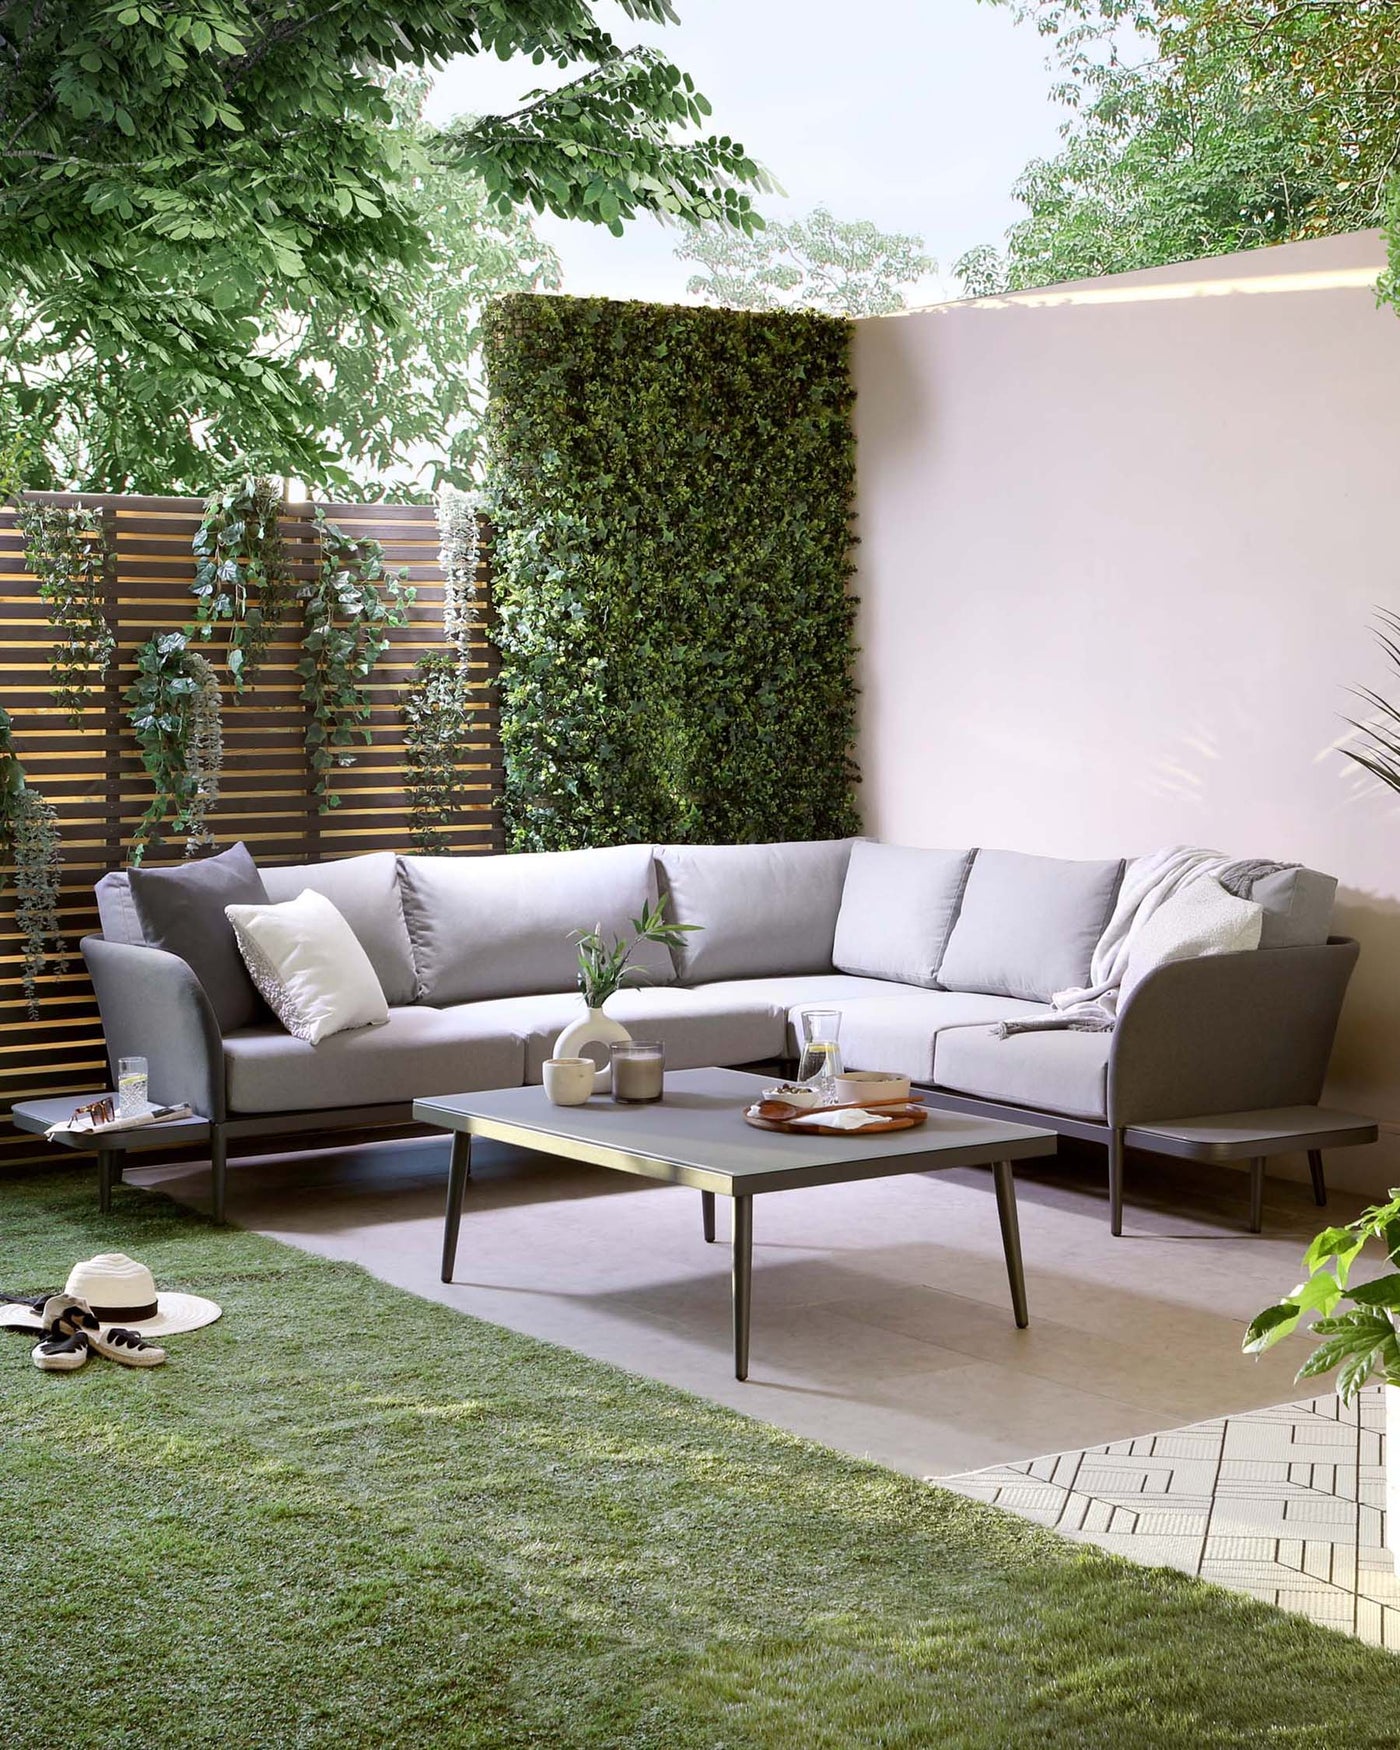 Modern outdoor furniture set featuring a sectional corner sofa with light grey cushions and a matching low-profile coffee table. The sofa is adorned with a variety of accent pillows in different shades of grey. The coffee table is rectangular with a smooth, matte finish and a slate grey colour, complementing the minimalist style of the seating. The furniture is arranged on a patio area with pavers and lush greenery in the background.